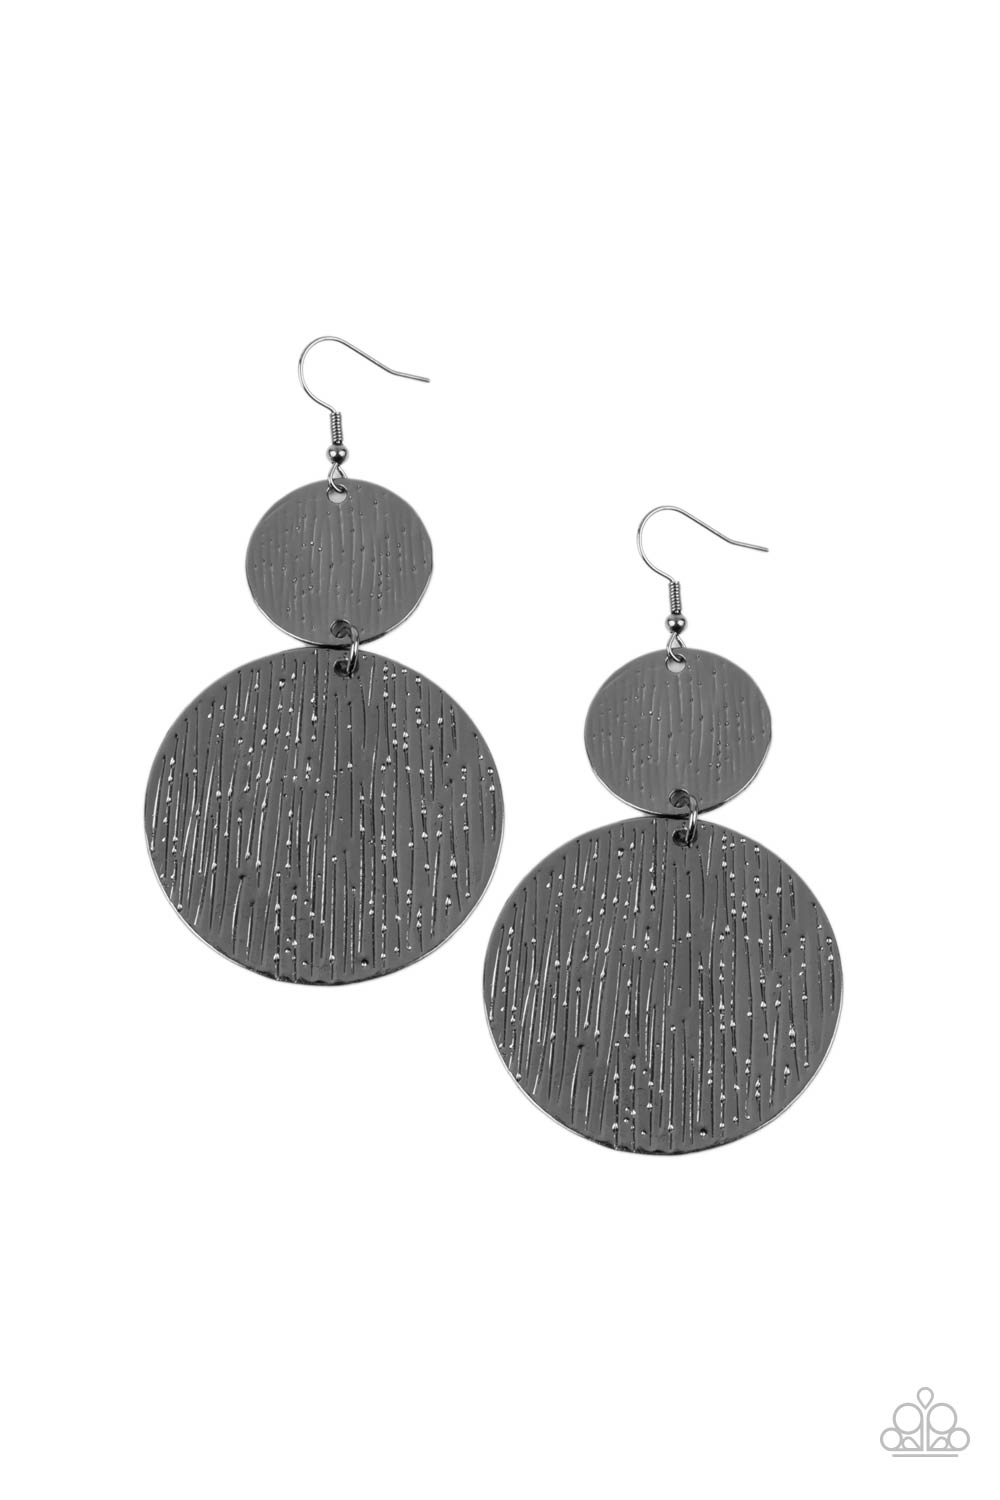 &lt;p&gt;Embossed in tactile linear patterns, two mismatched gunmetal discs link into a glistening lure. Earring attaches to a standard fishhook fitting. &lt;/p&gt;  

&lt;p&gt; &lt;i&gt;  Sold as one pair of earrings. &lt;/i&gt;  &lt;/p&gt;


&lt;img src=\&quot;https://d9b54x484lq62.cloudfront.net/paparazzi/shopping/images/517_tag150x115_1.png\&quot; alt=\&quot;New Kit\&quot; align=\&quot;middle\&quot; height=\&quot;50\&quot; width=\&quot;50\&quot;&gt;